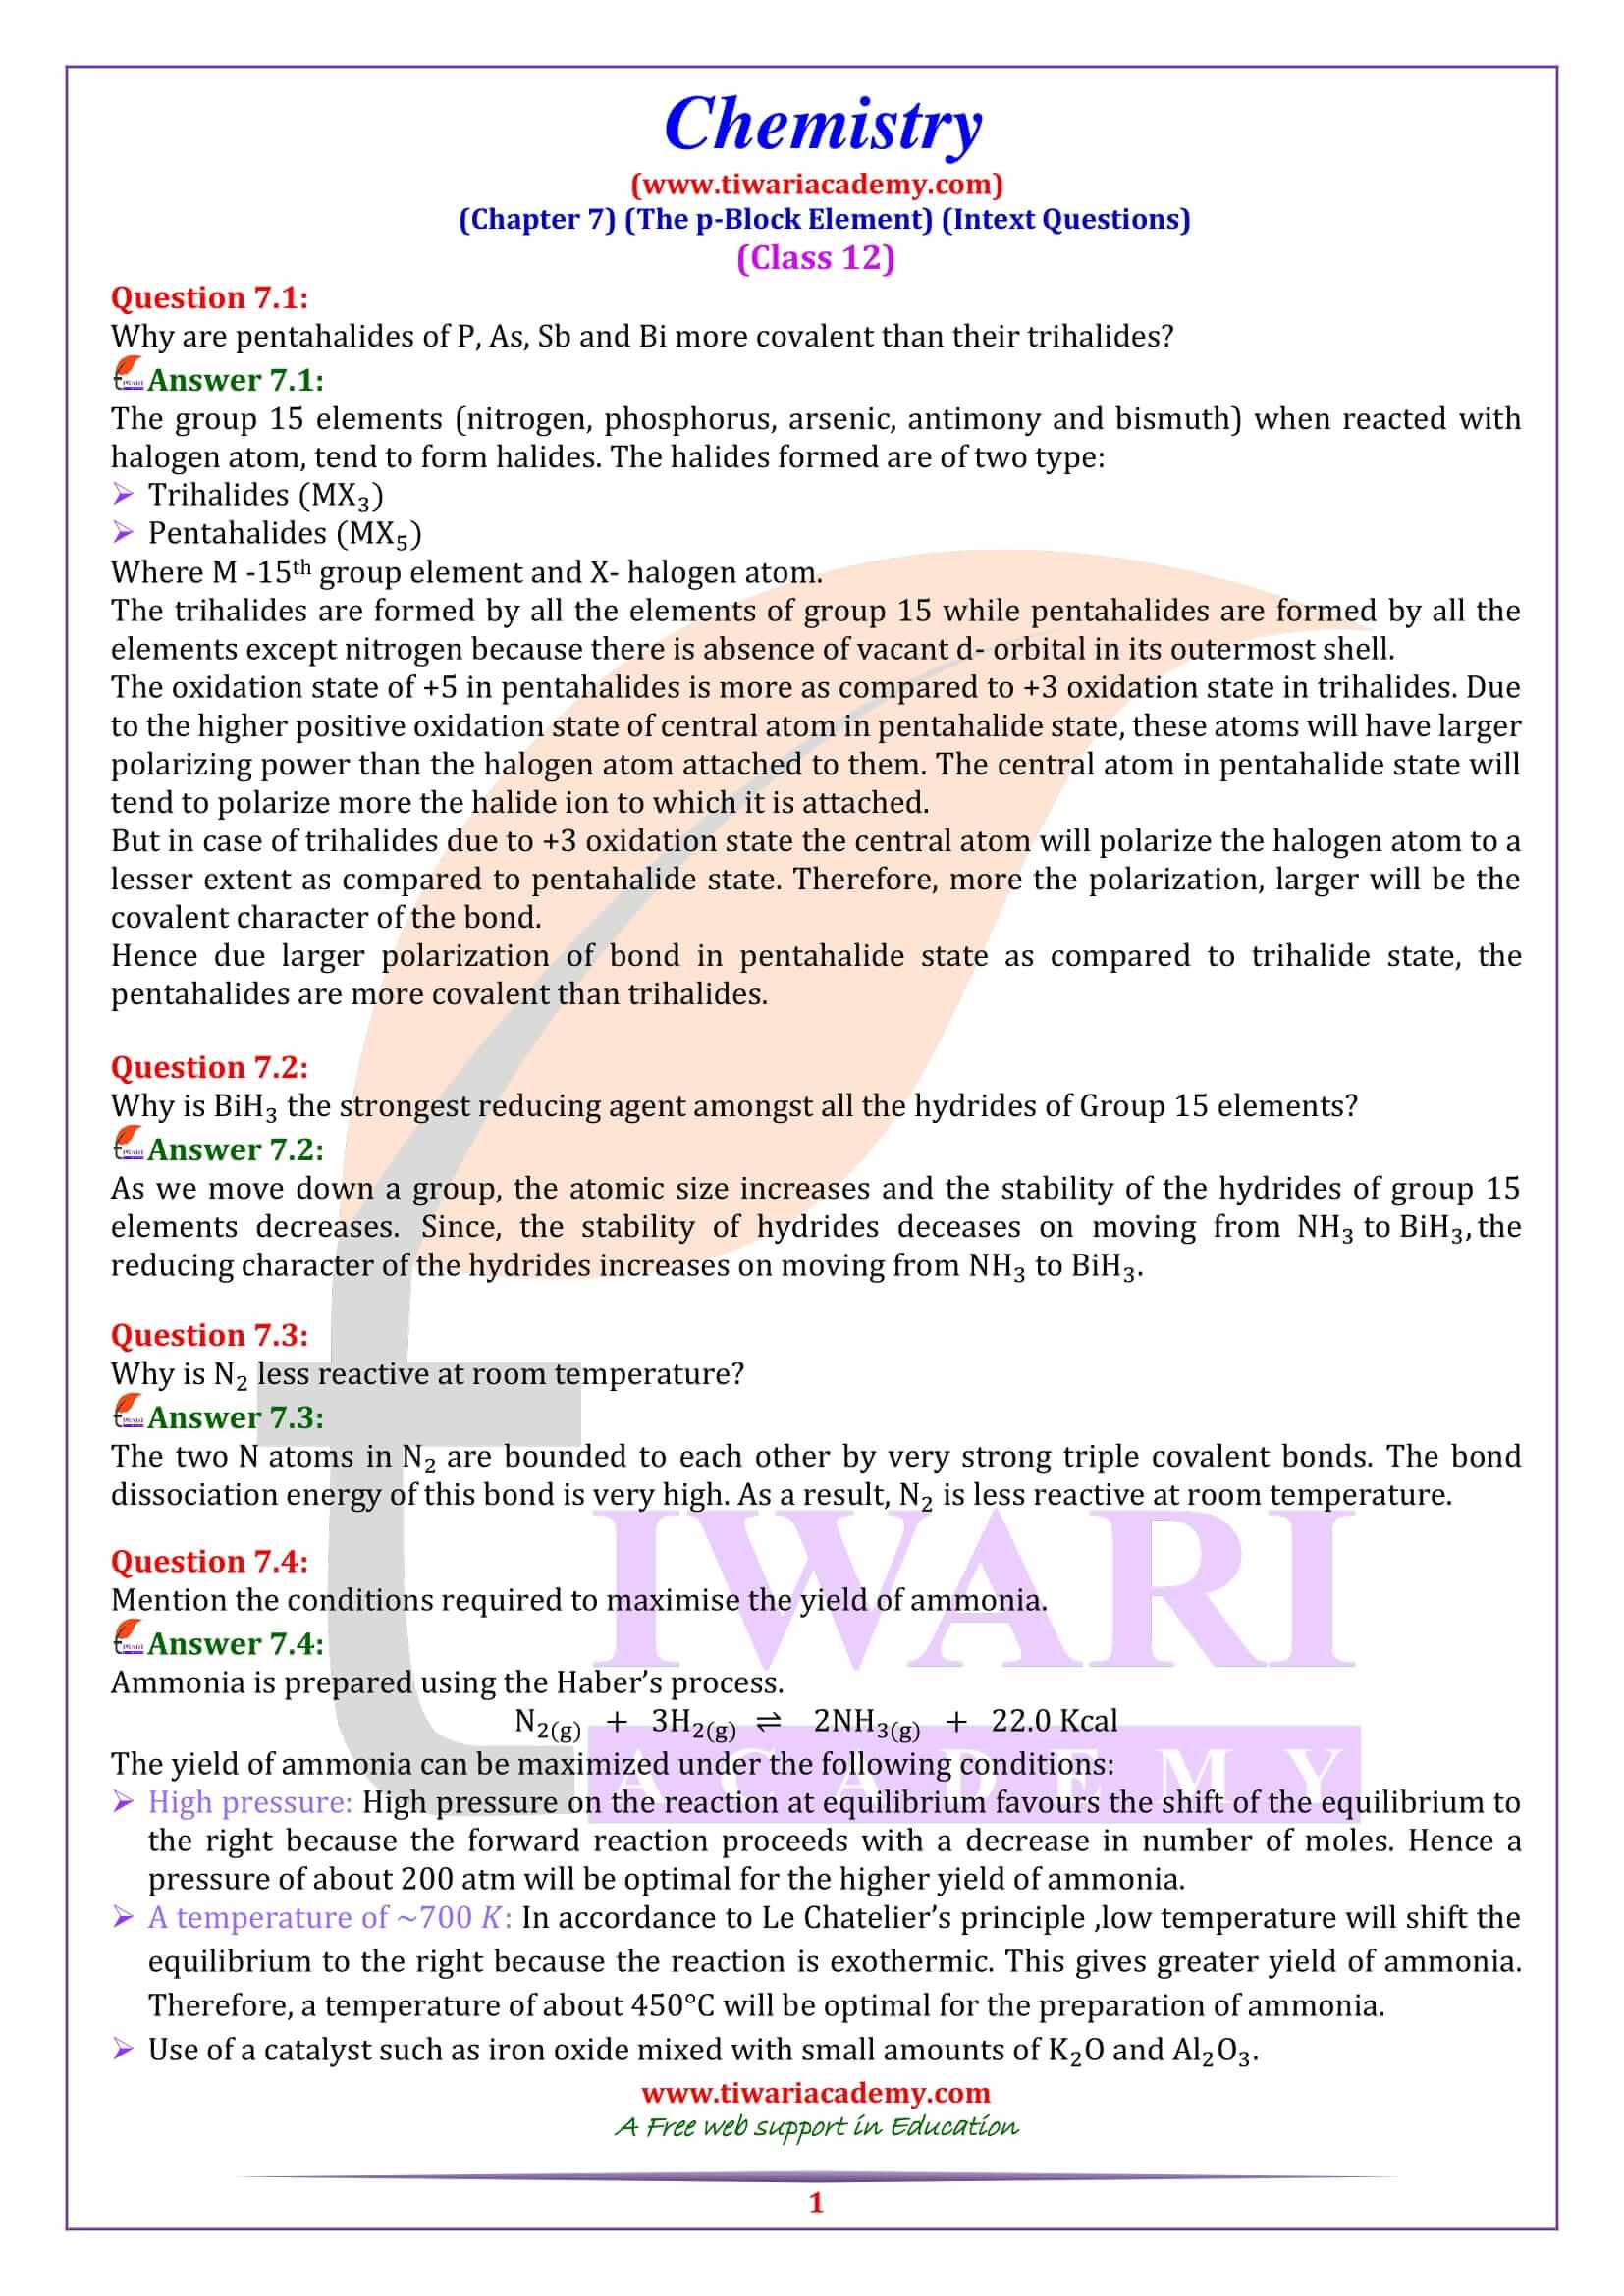 NCERT Solutions for Class 12 Chemistry Chapter 7 Intext